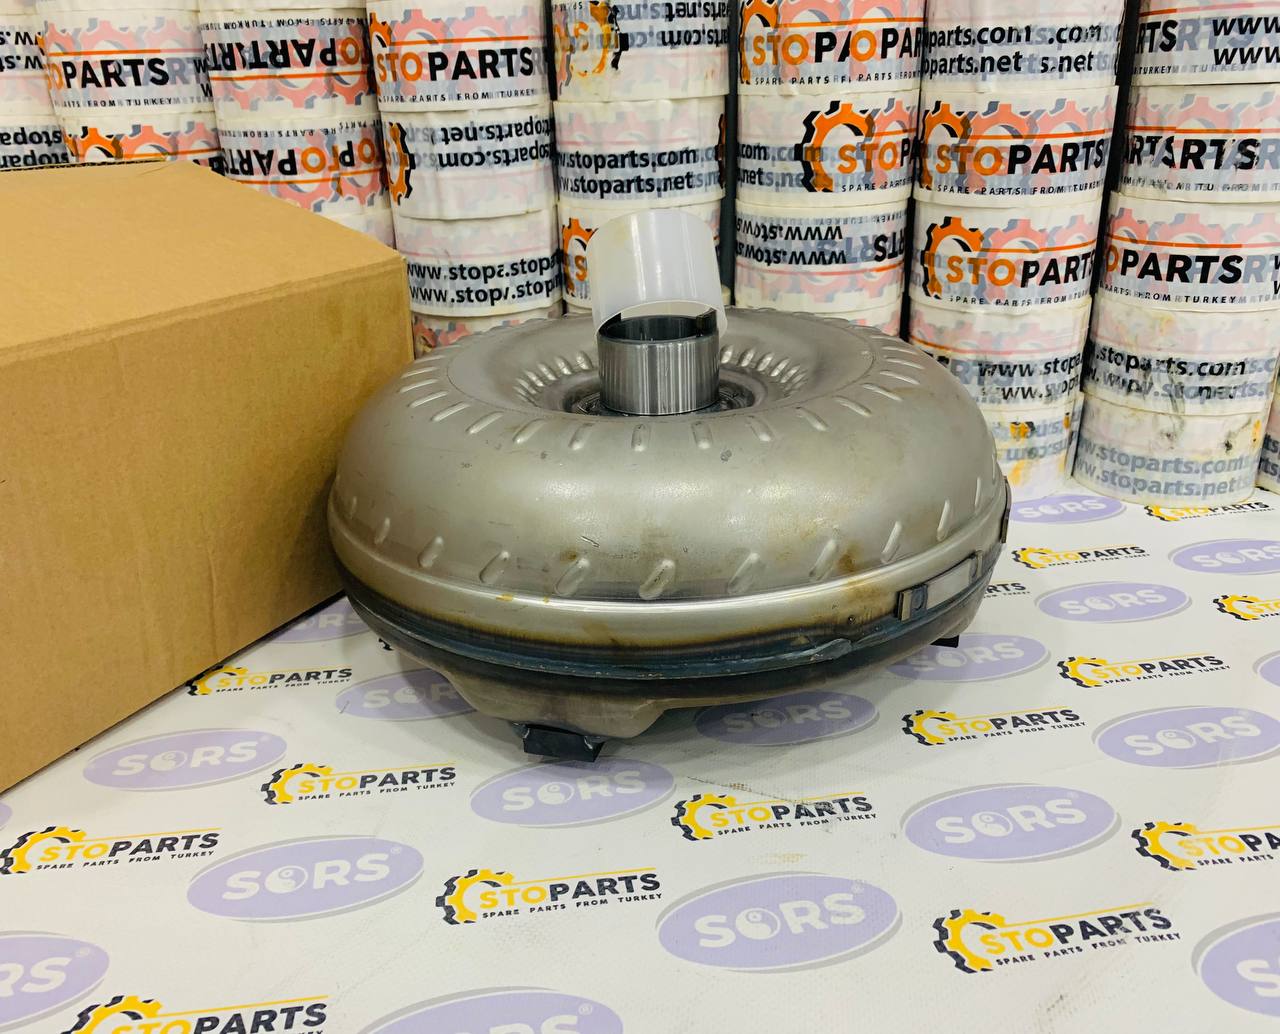 TORQUE CONVERTER 87400114 FOR CASE AND NEW HOLLAND